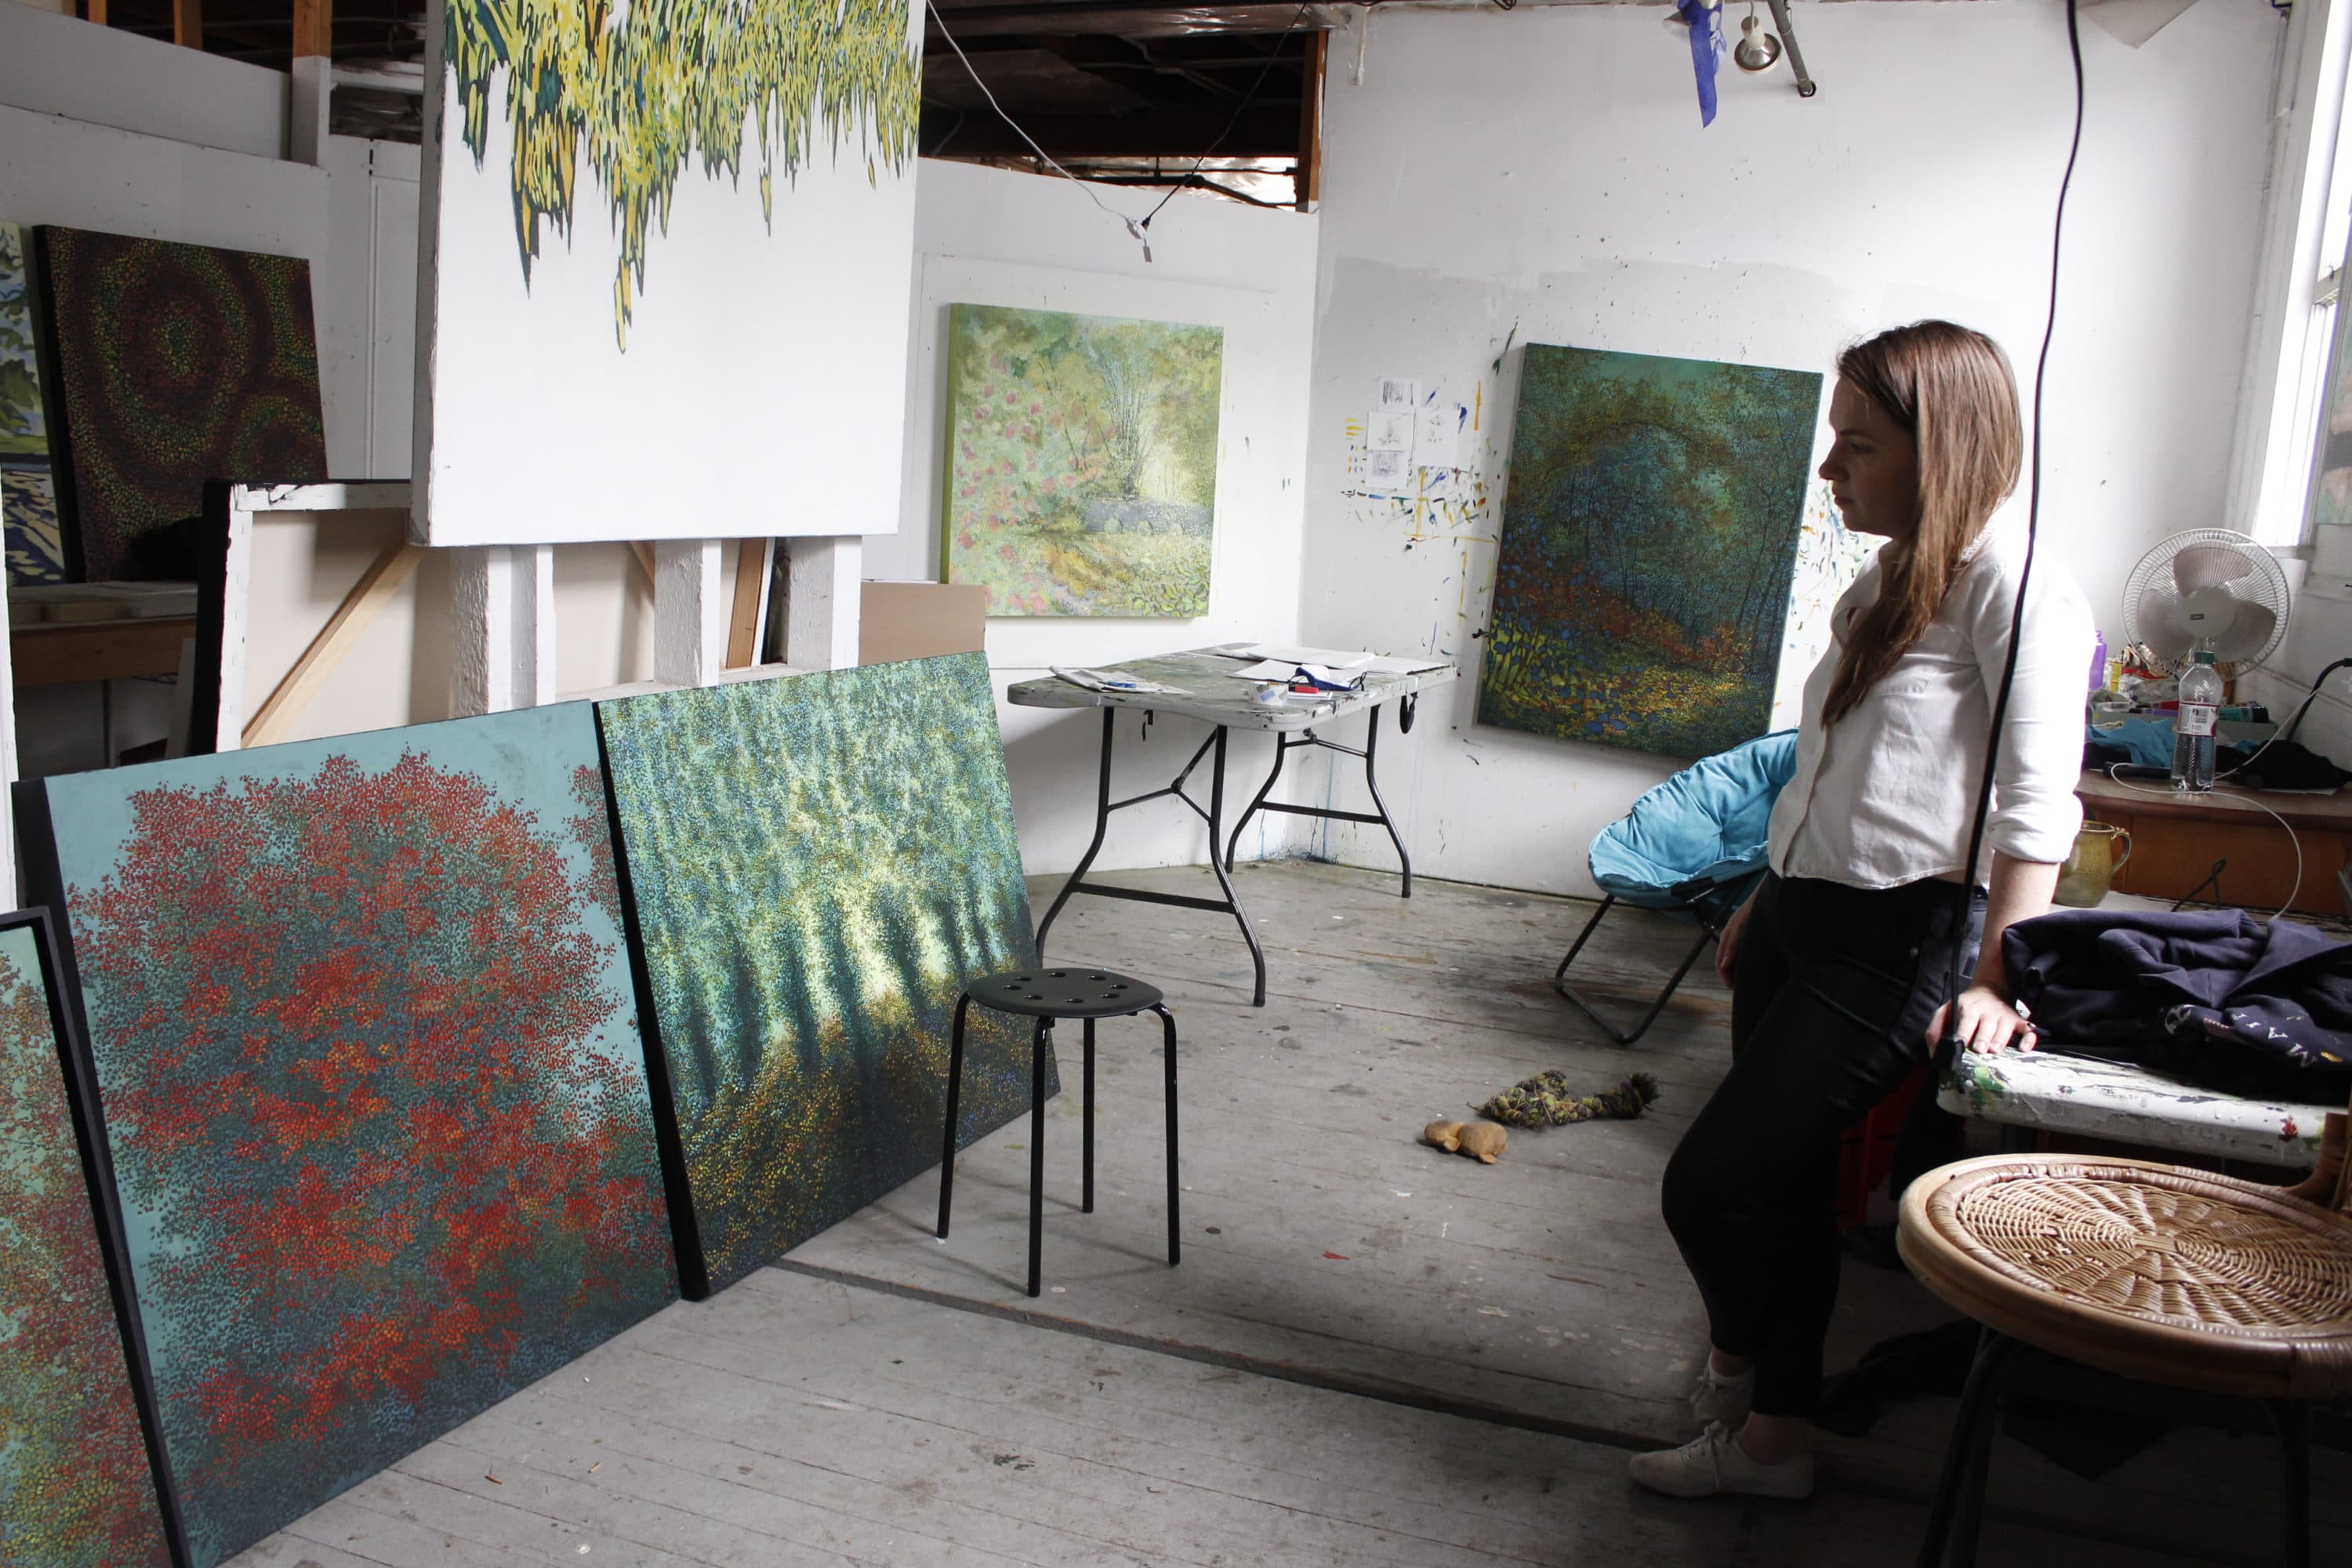 In Somerville, Affordable Studio Space For Artists Is Rapidly Disappearing  | WBUR News